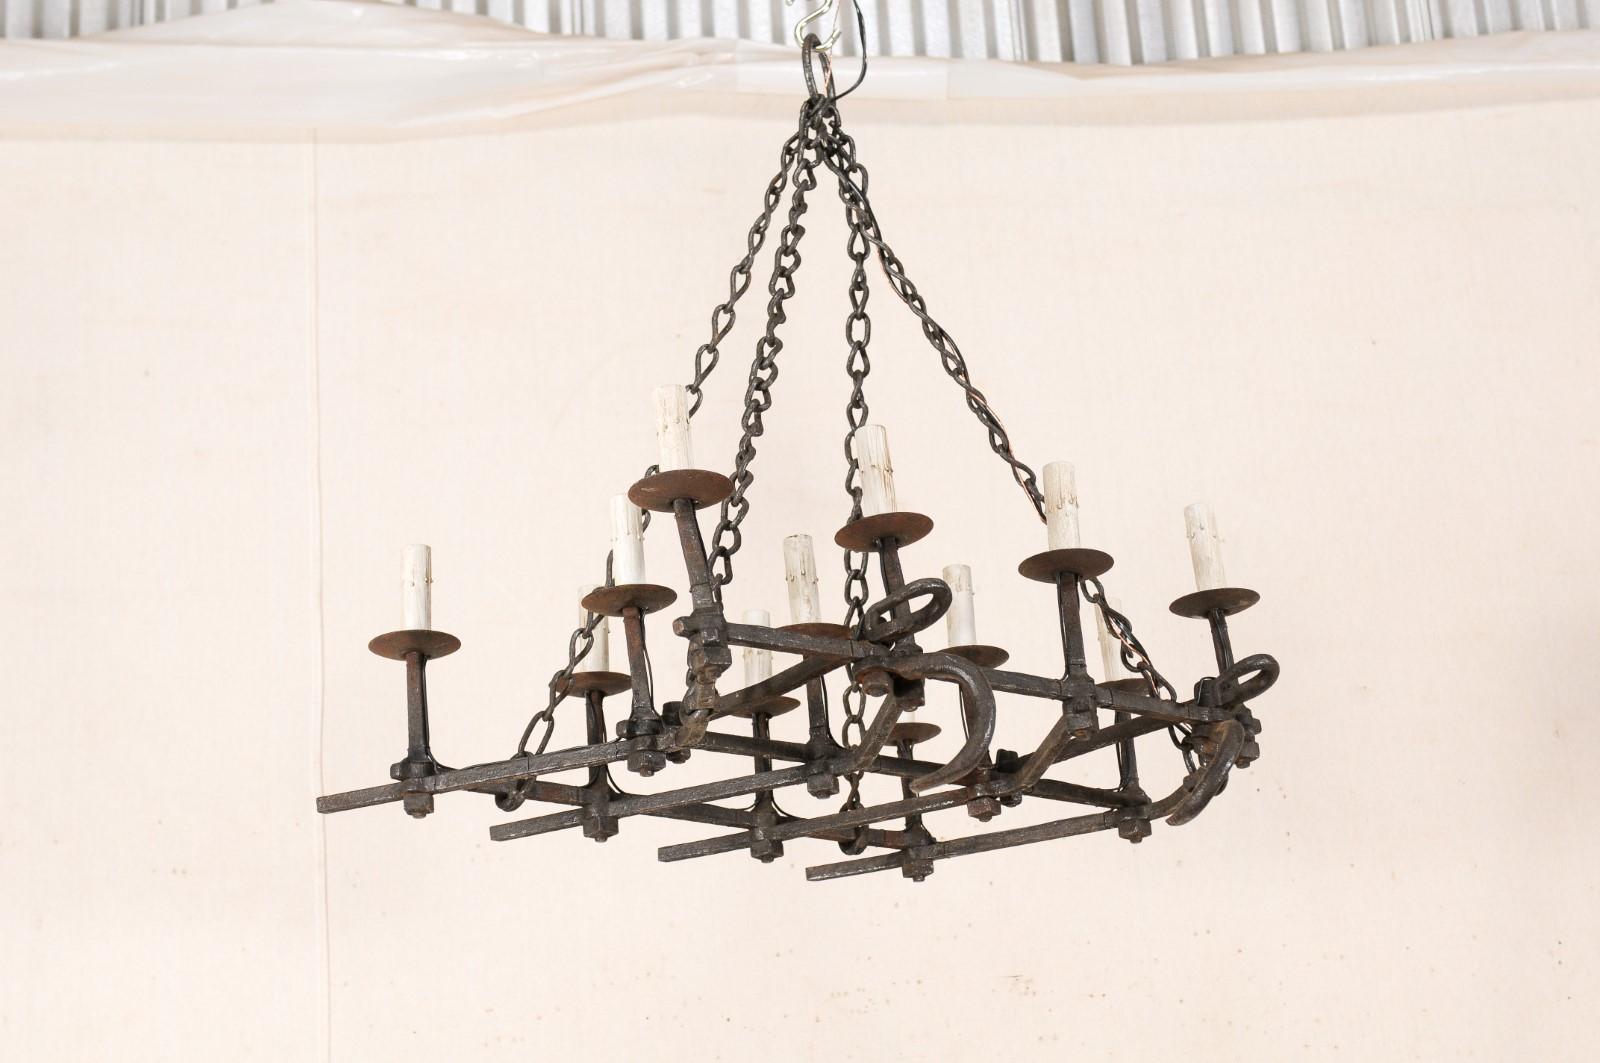 A French twelve-light forged iron chandelier from the mid-20th century. This vintage chandelier from France, which looks to have originally been an old farm implement that was retrofitted into a light fixture, has an overall rectangular-shape, with